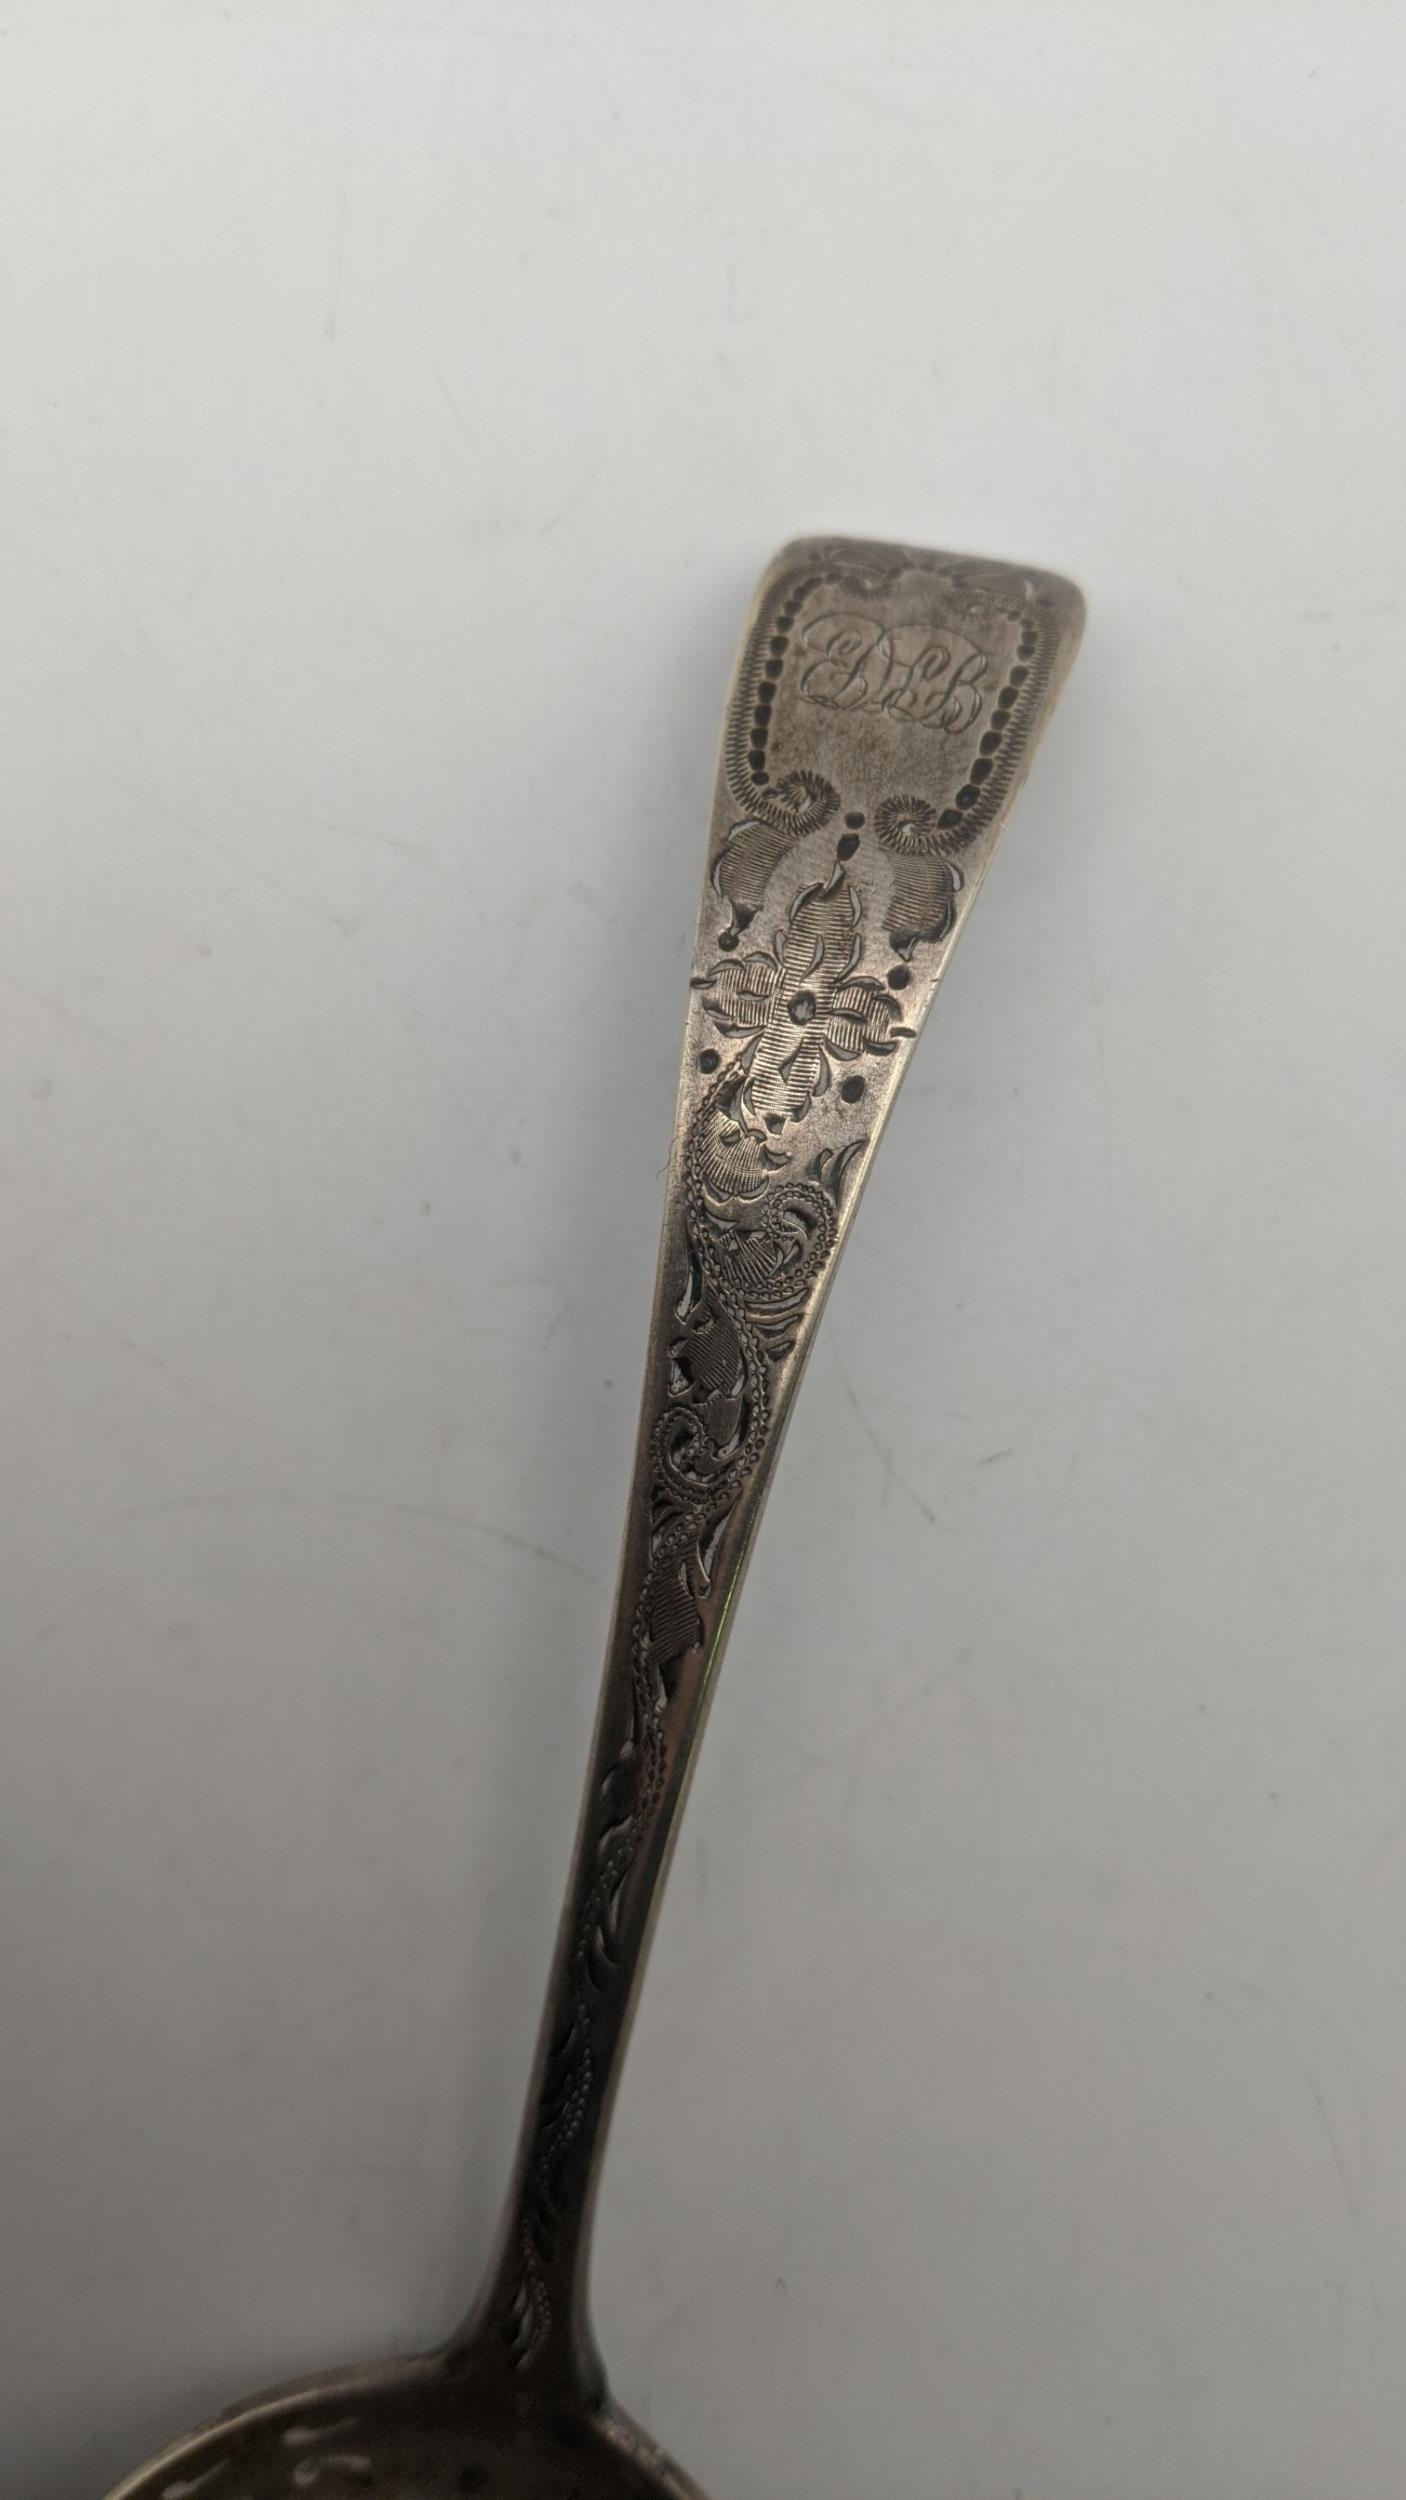 A silver sifter spoon with engraved and initiated ornament hallmarked London 1898, weight 50g - Image 3 of 3